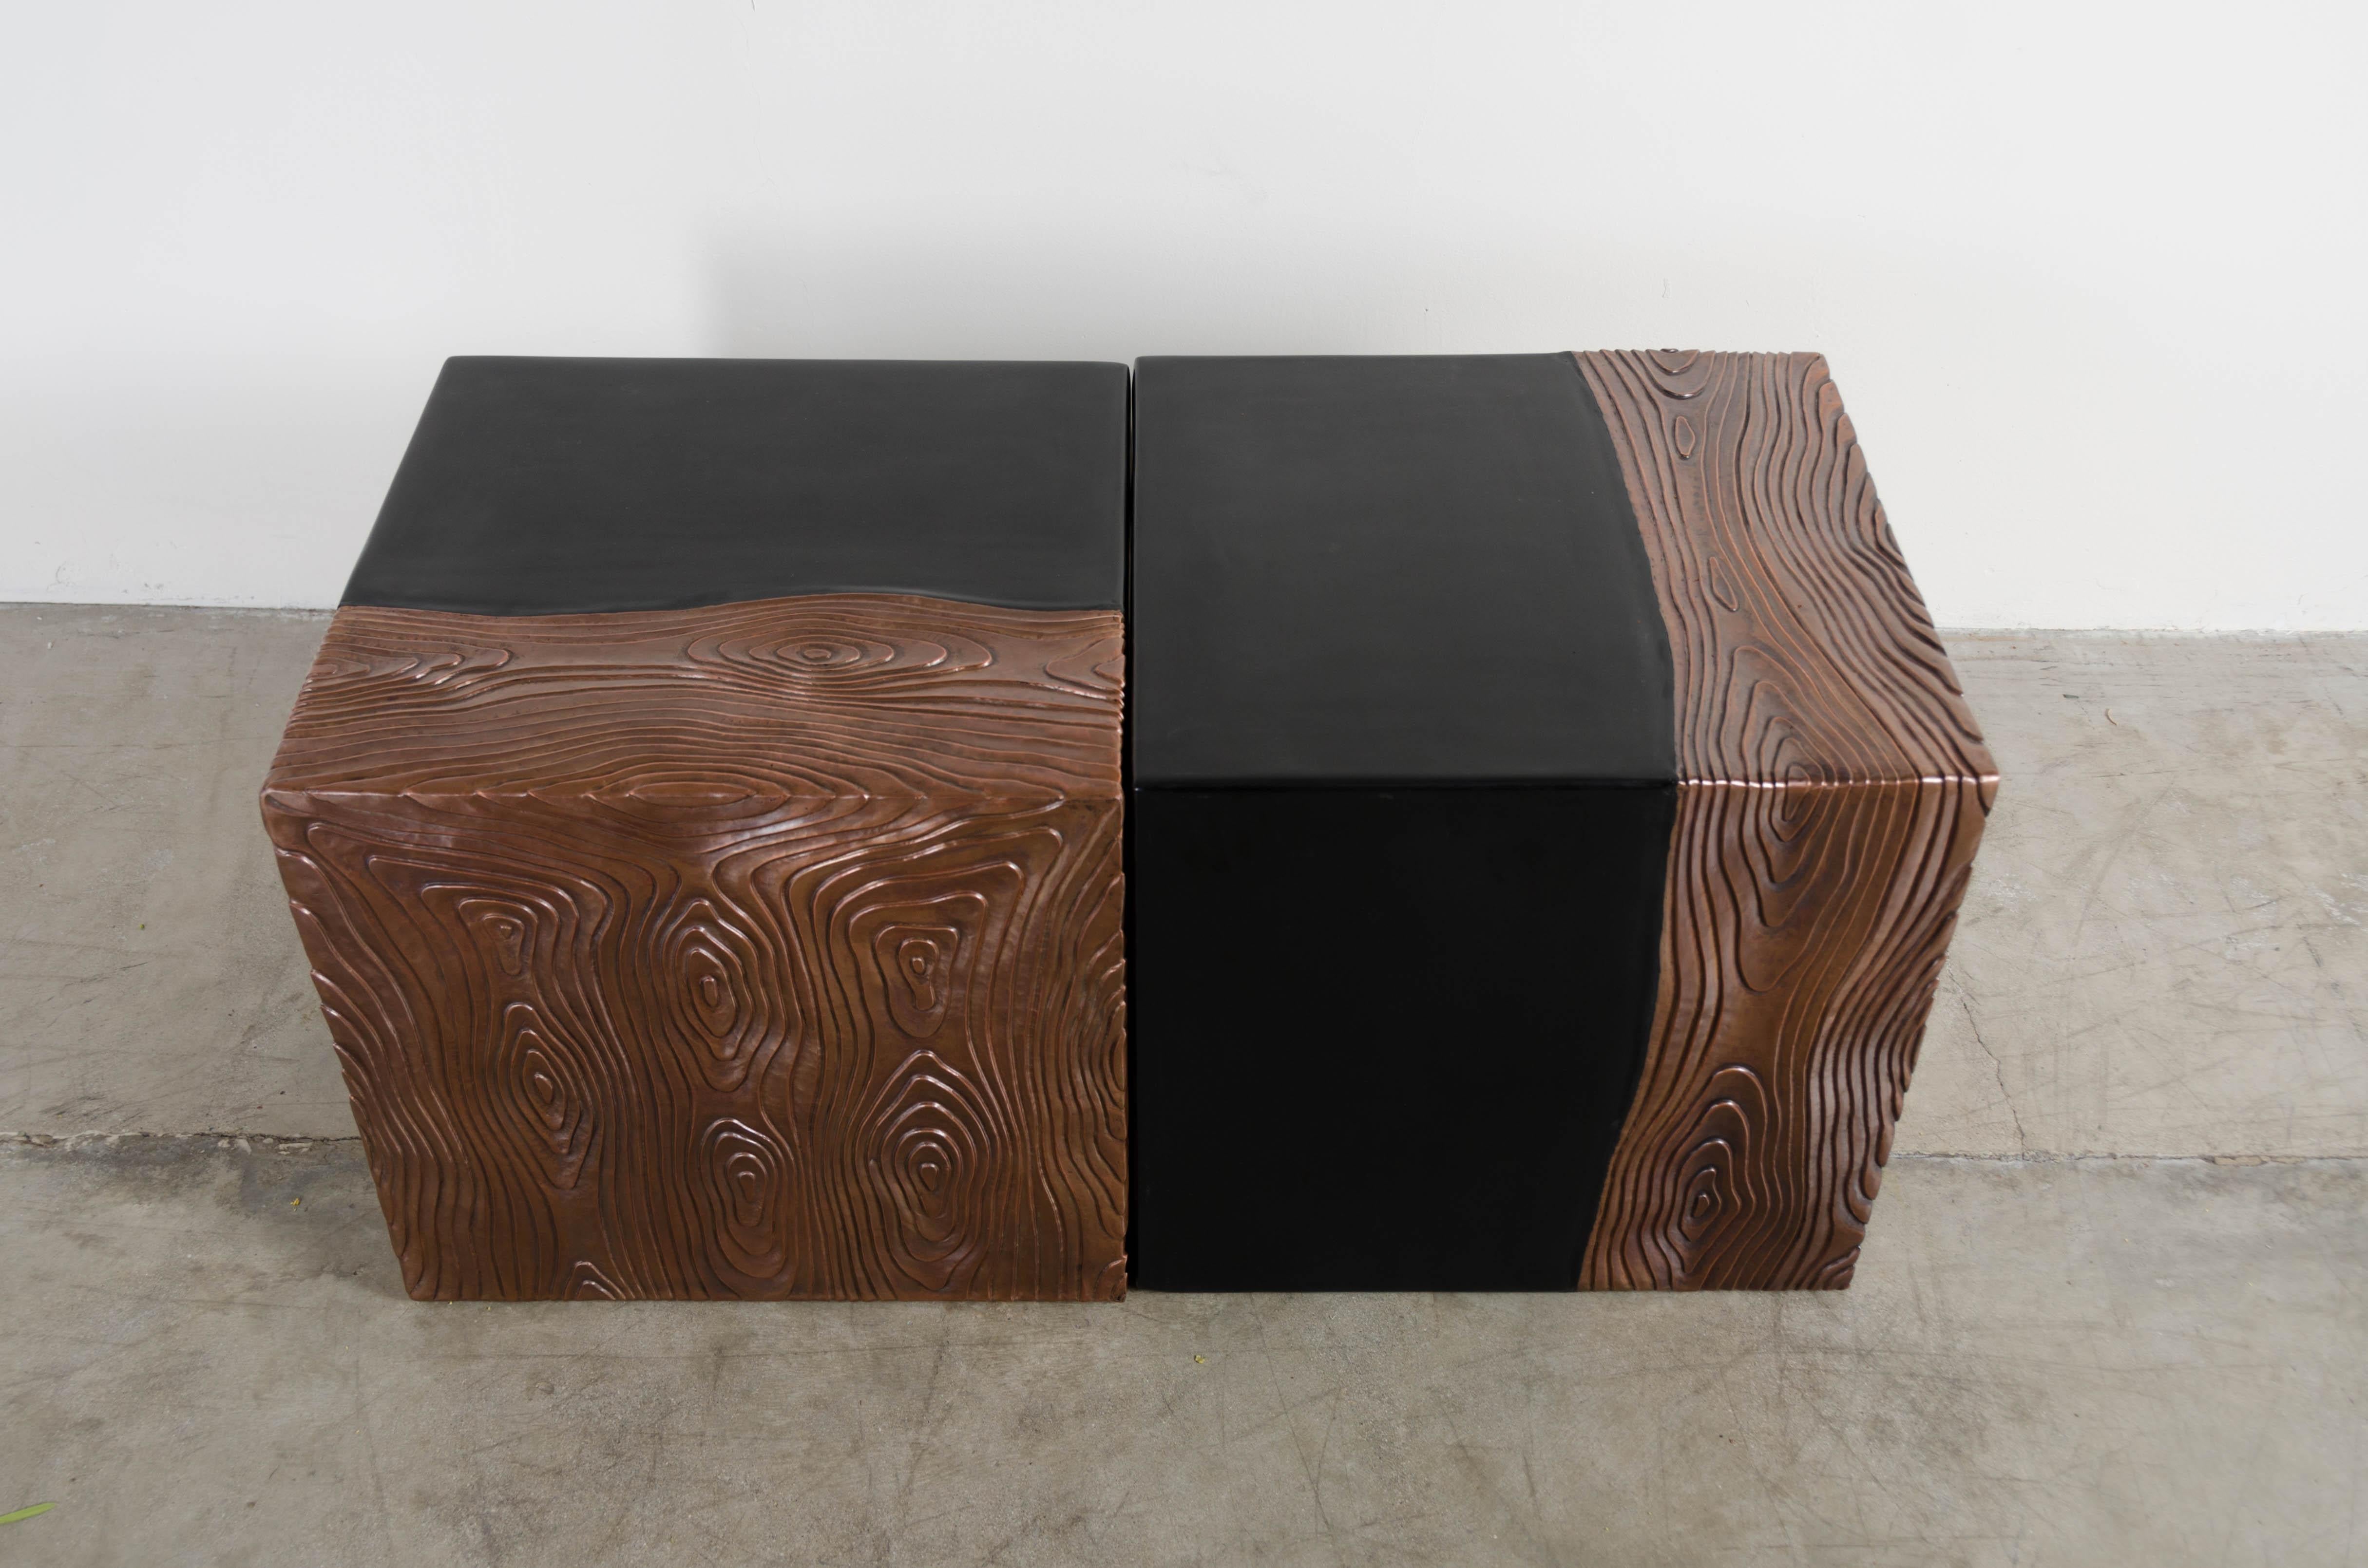 Square Seat with Woodgrain Design, Black Lacquer, Copper, Set of 2 by Robert Kuo For Sale 3